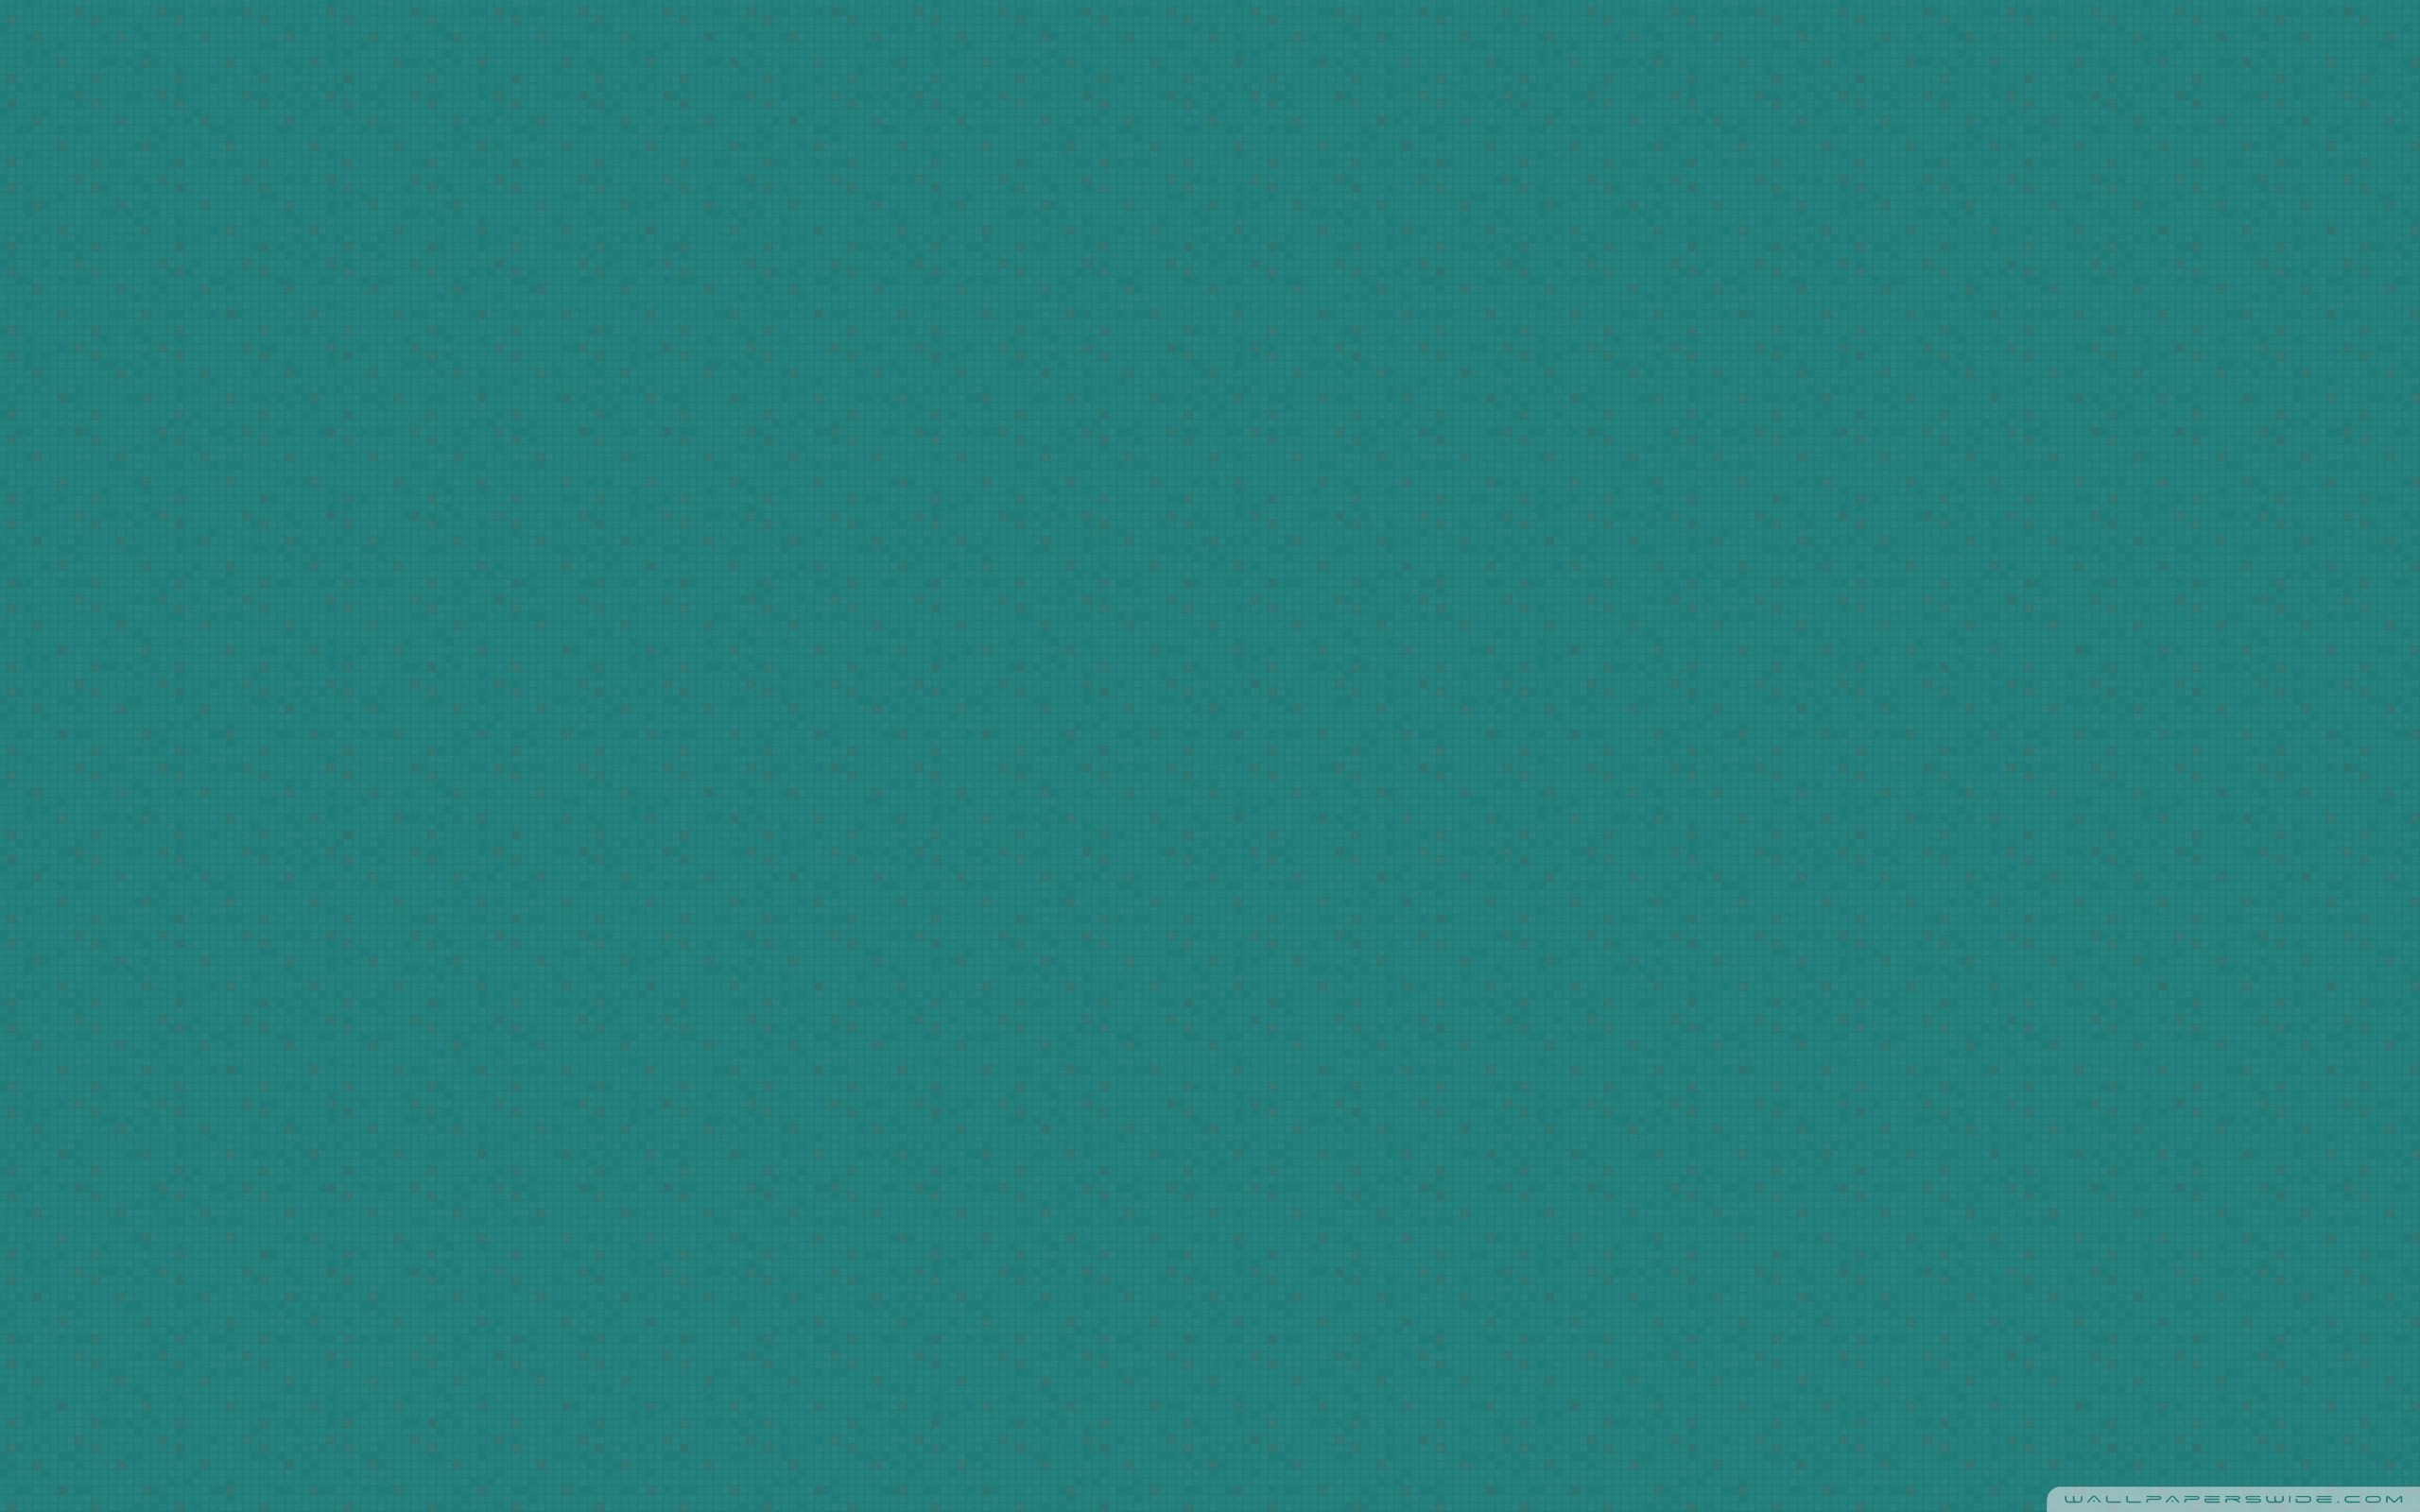 Turquoise wallpaper ·① Download free cool High Resolution wallpapers for desktop computers and ...